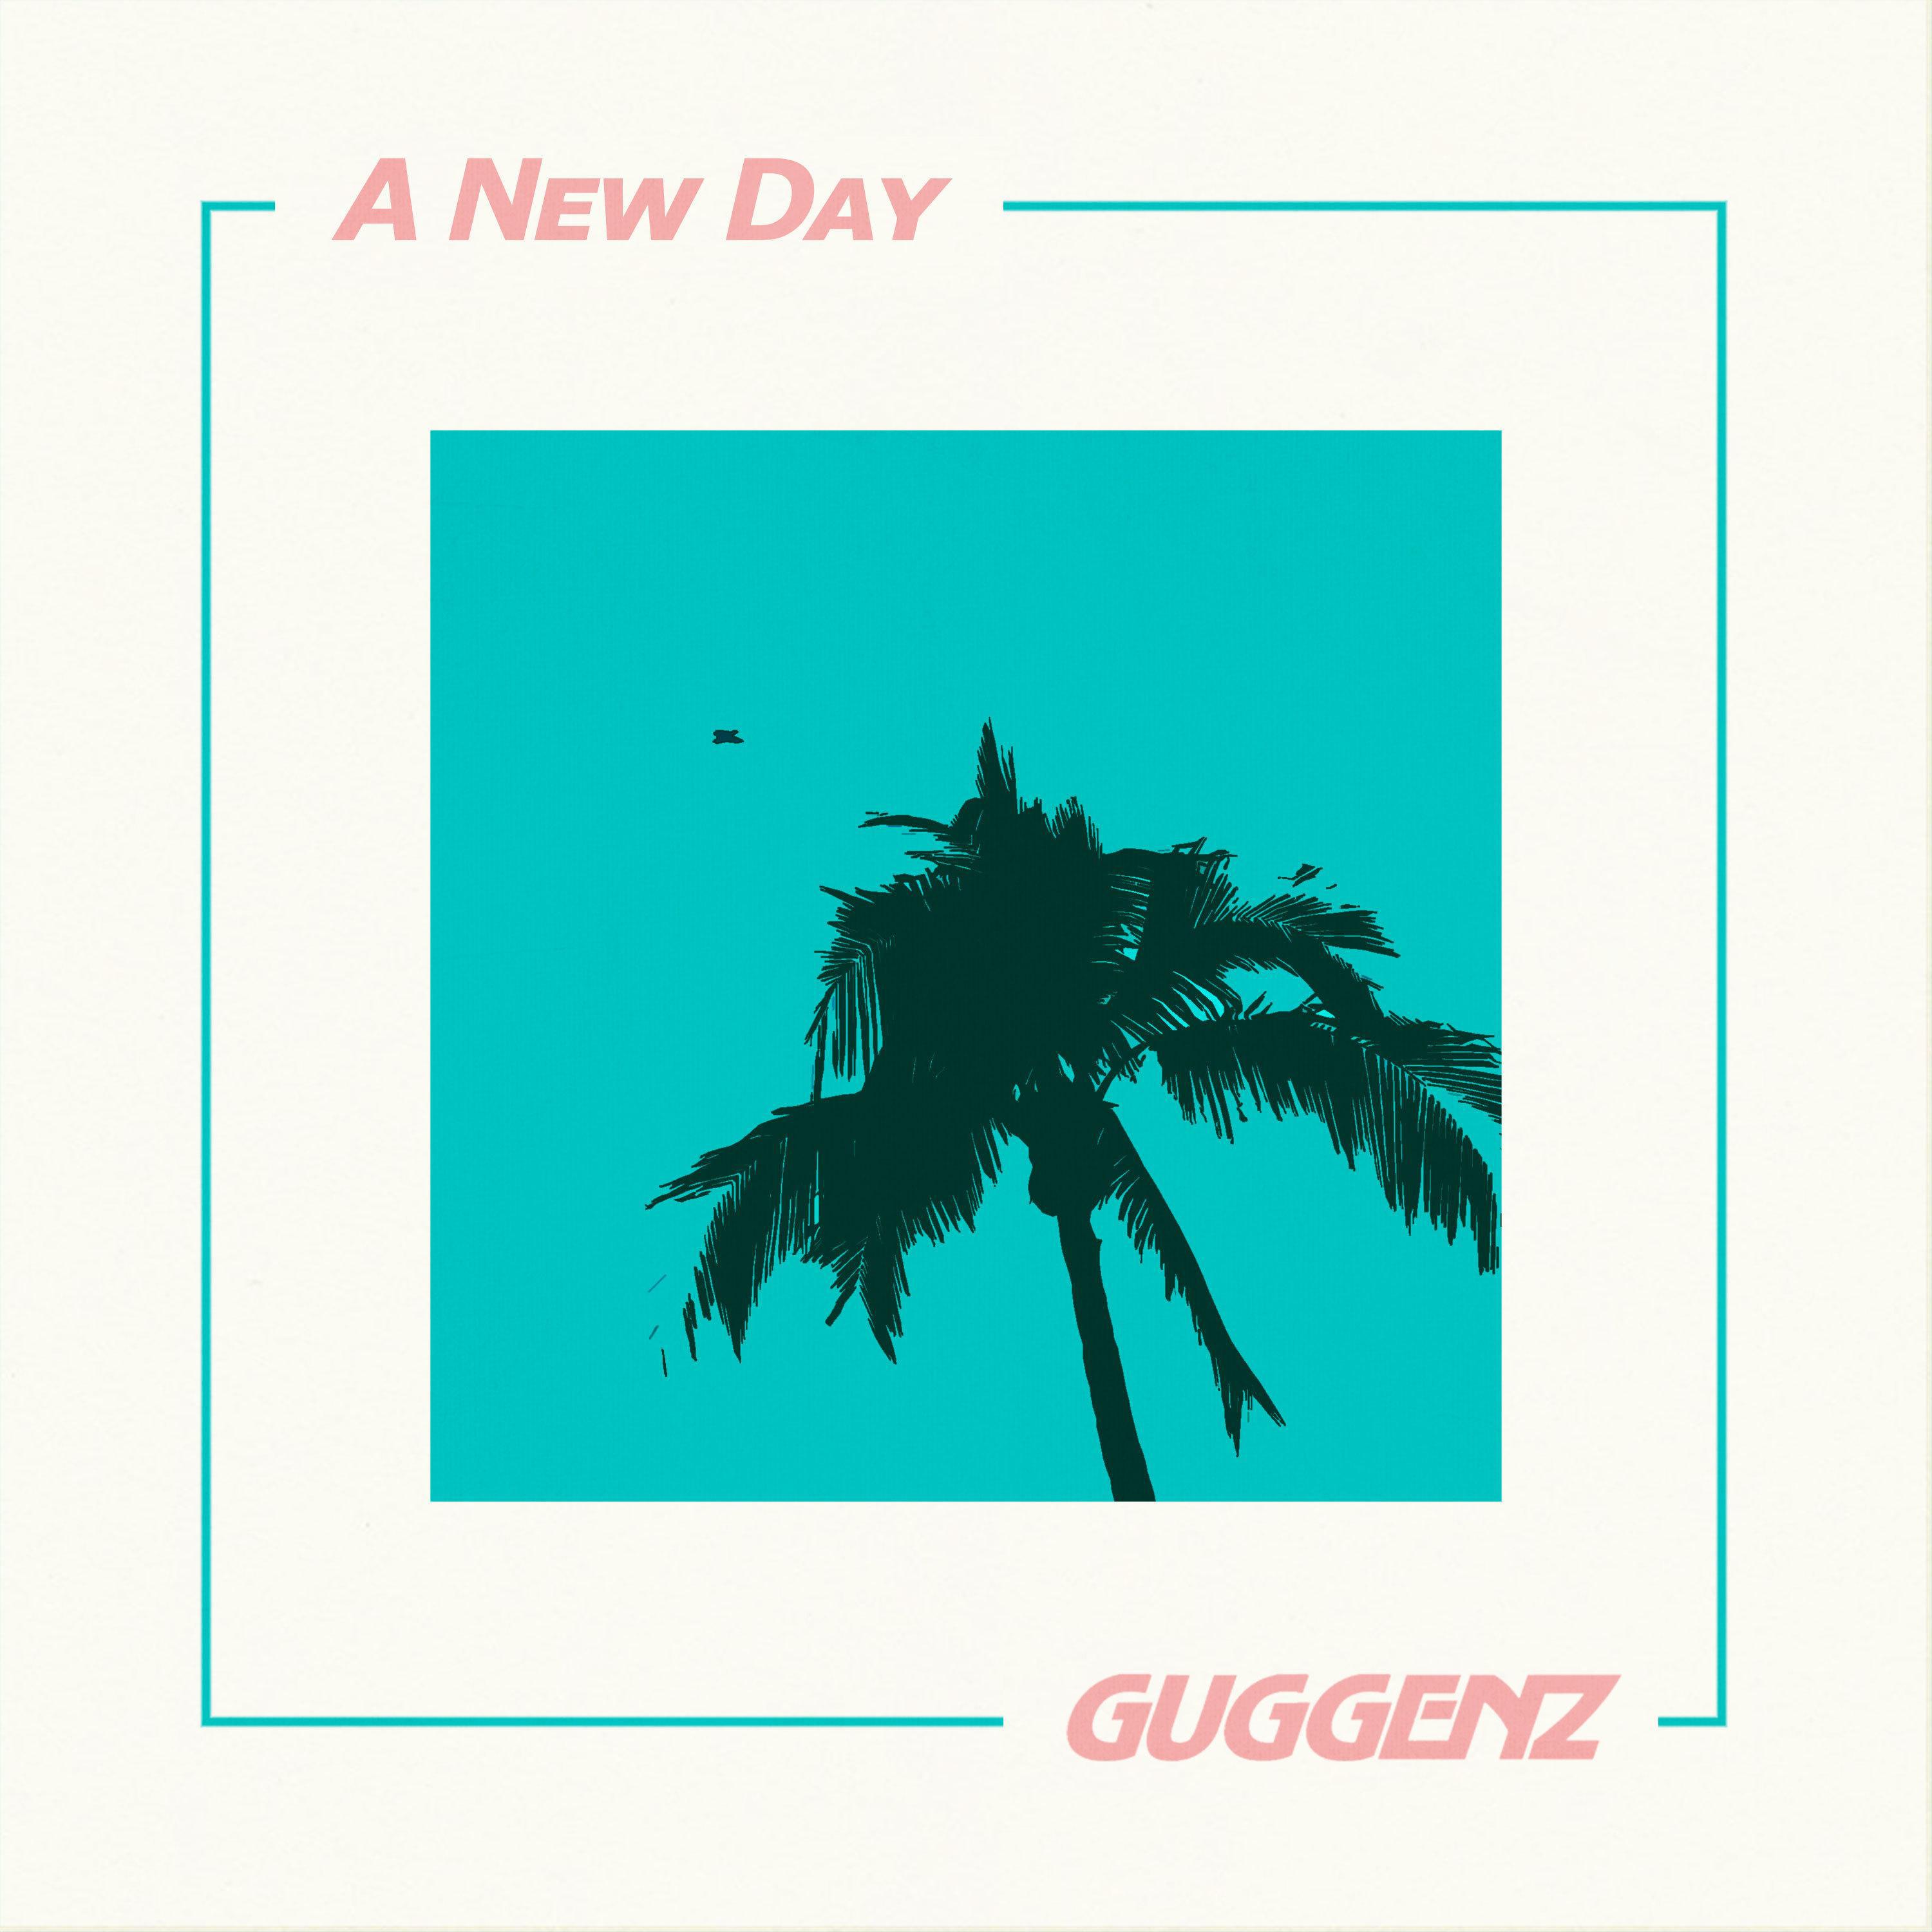 Baby You're the One for Me歌词 歌手Guggenz-专辑A New Day-单曲《Baby You're the One for Me》LRC歌词下载